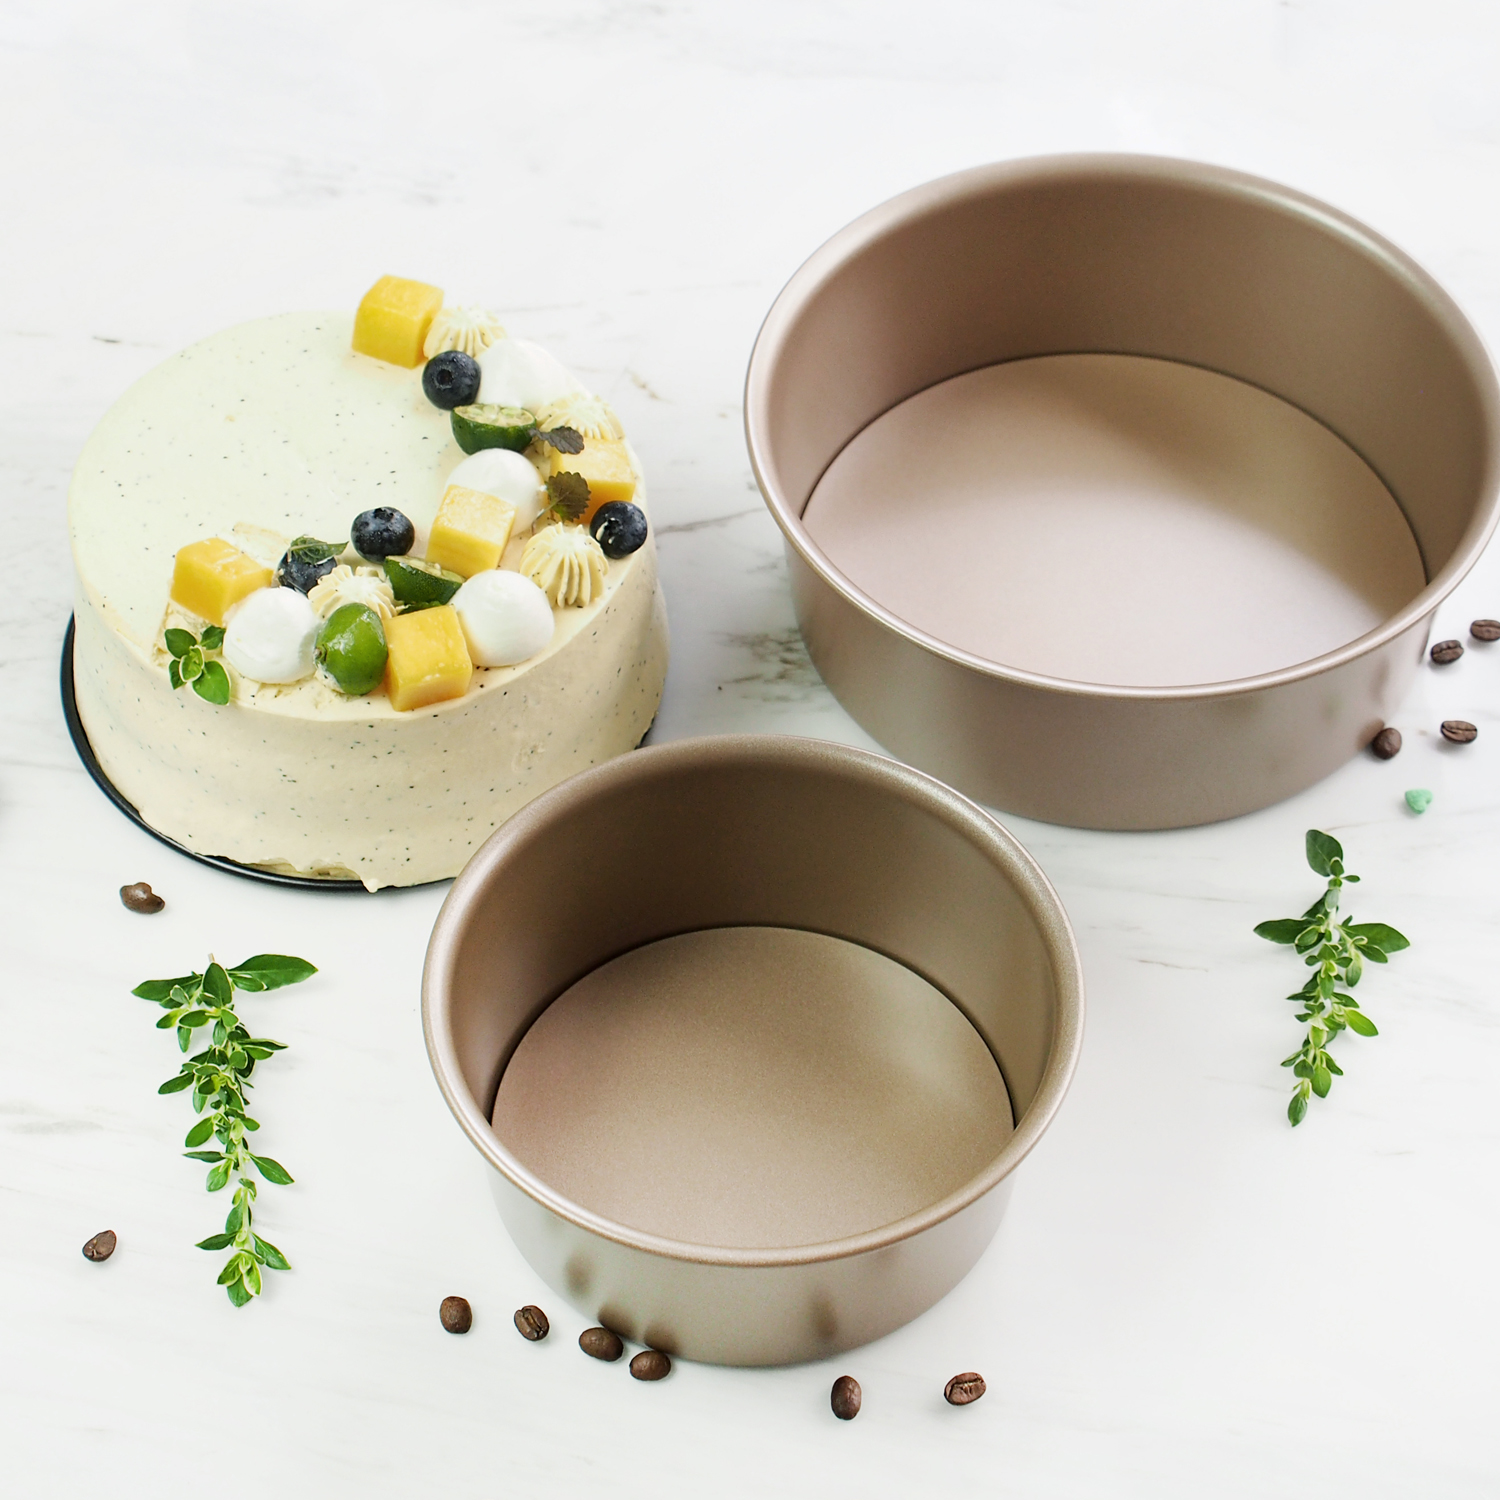 Food grade Thickened Golden Cake Baking Pan mould with removable loose bottom